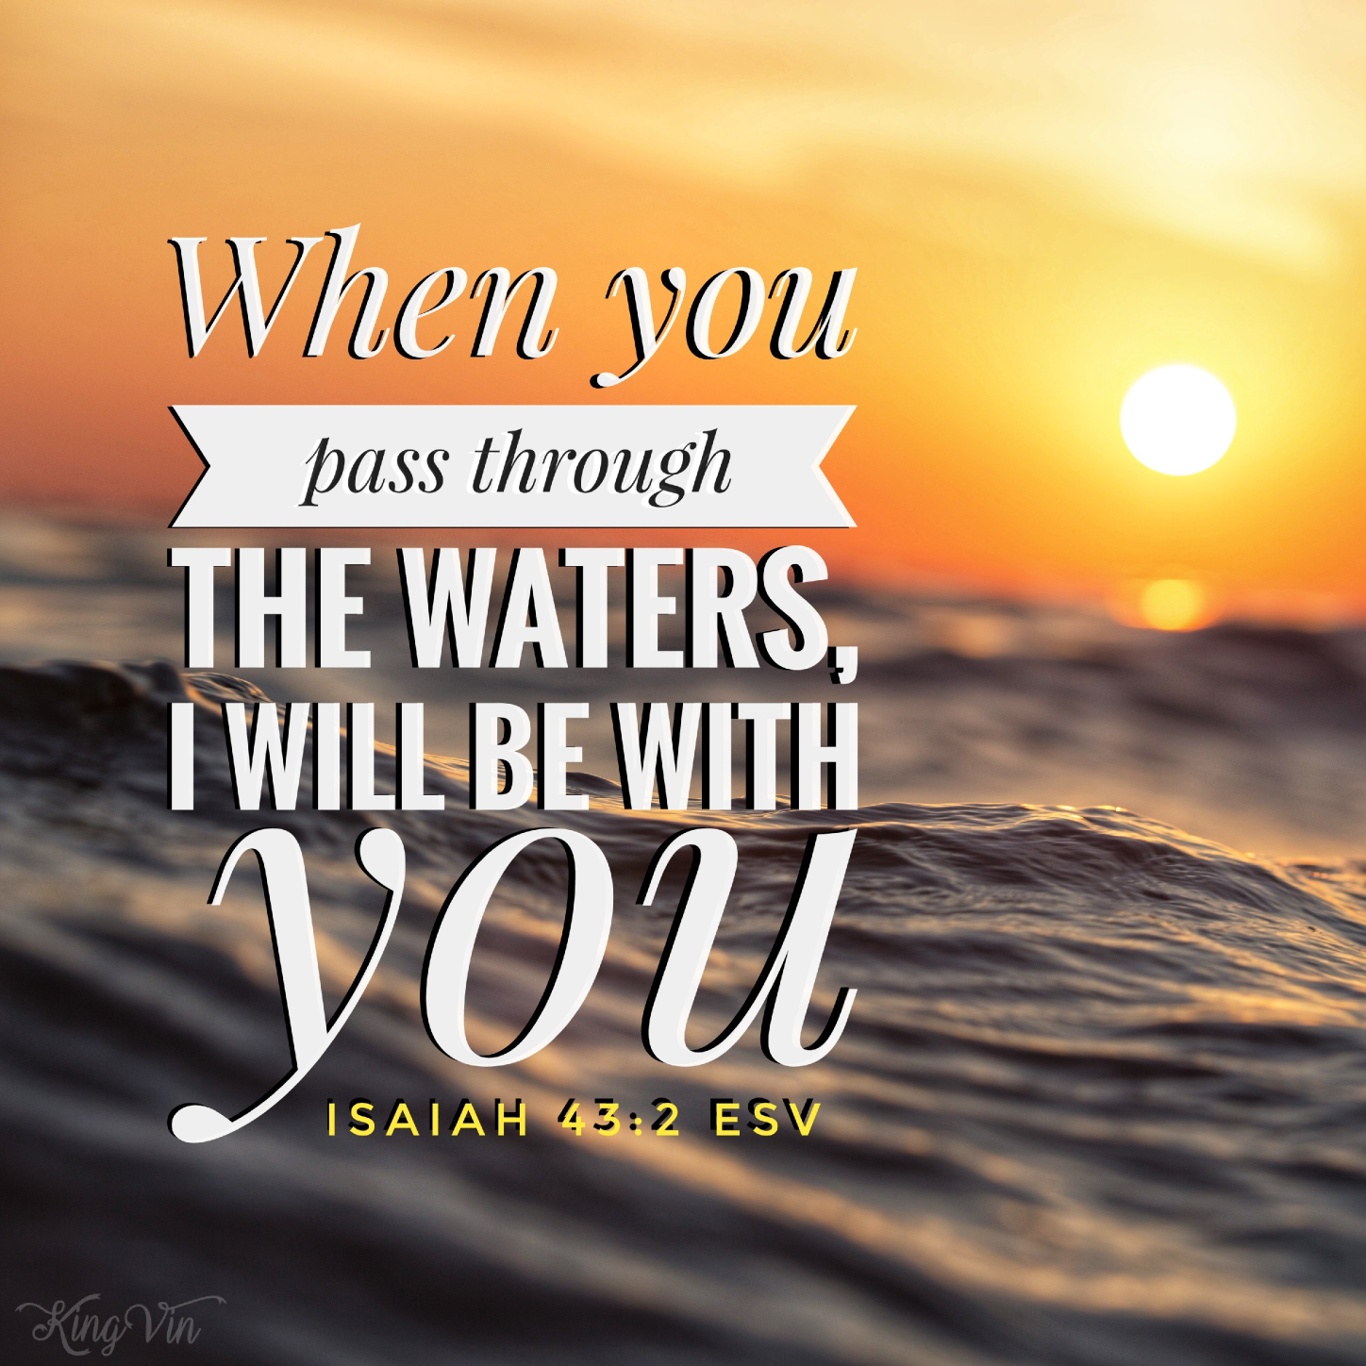 When you pass through the waters, I will be with you; and through the rivers, they shall not overwhelm you; when you walk through fire you shall not be burned, and the flame shall not consume you. Isaiah 43:2 ESV